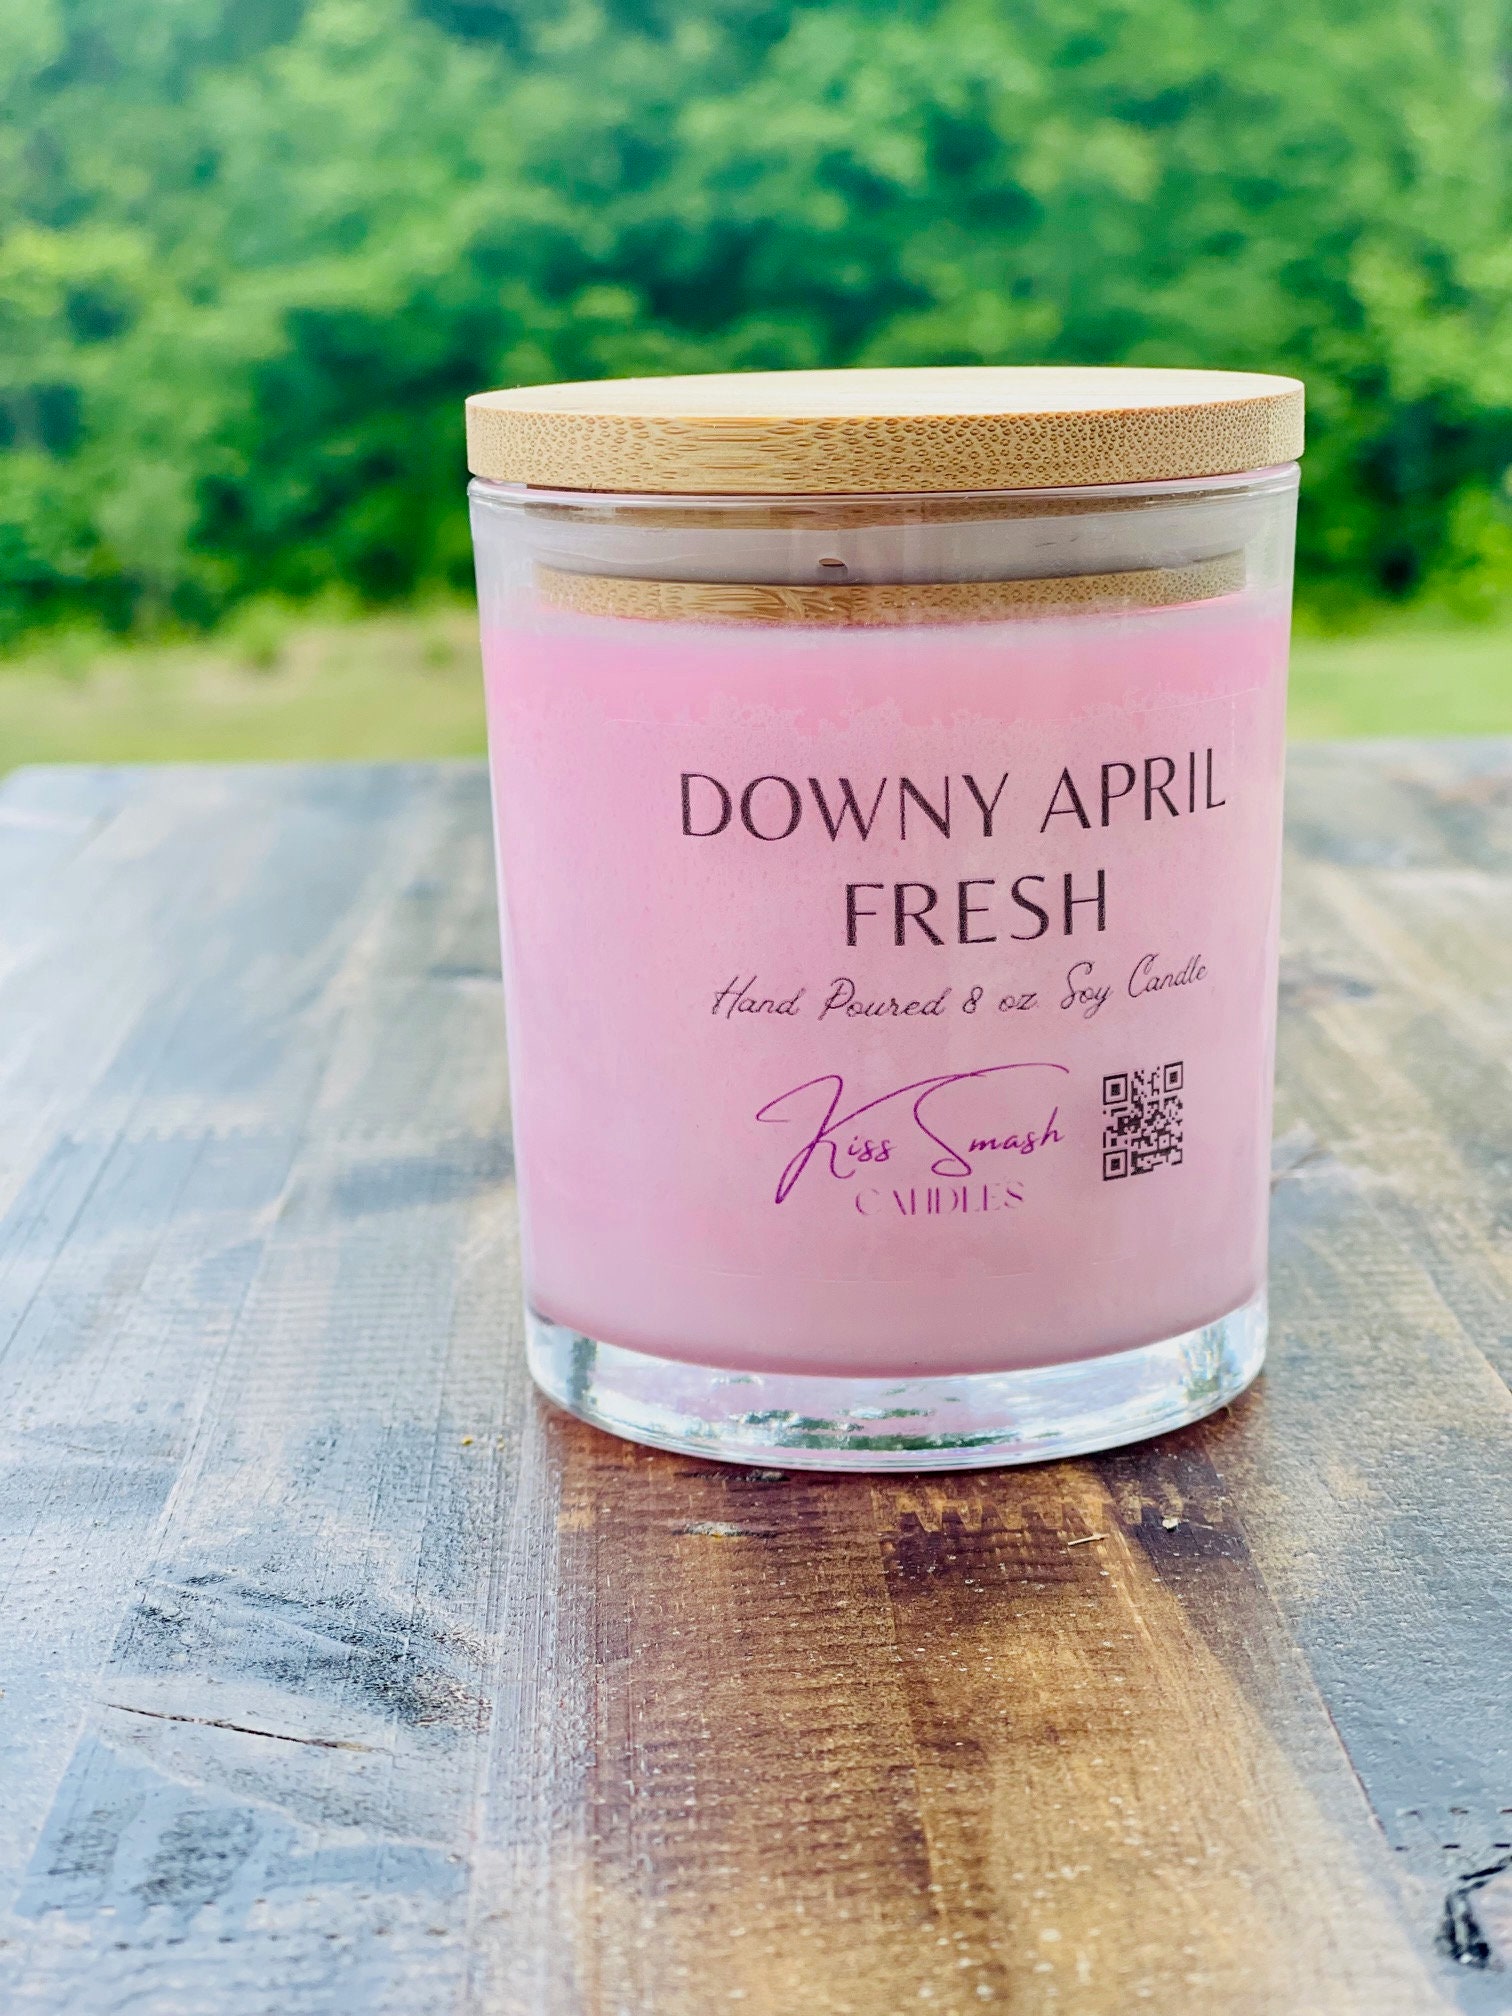 April Fresh Downy Type 2.5oz Wax Melt strong scent gift idea wax tart  candle wax melter wax warmer home scent fun bakery scent birthday